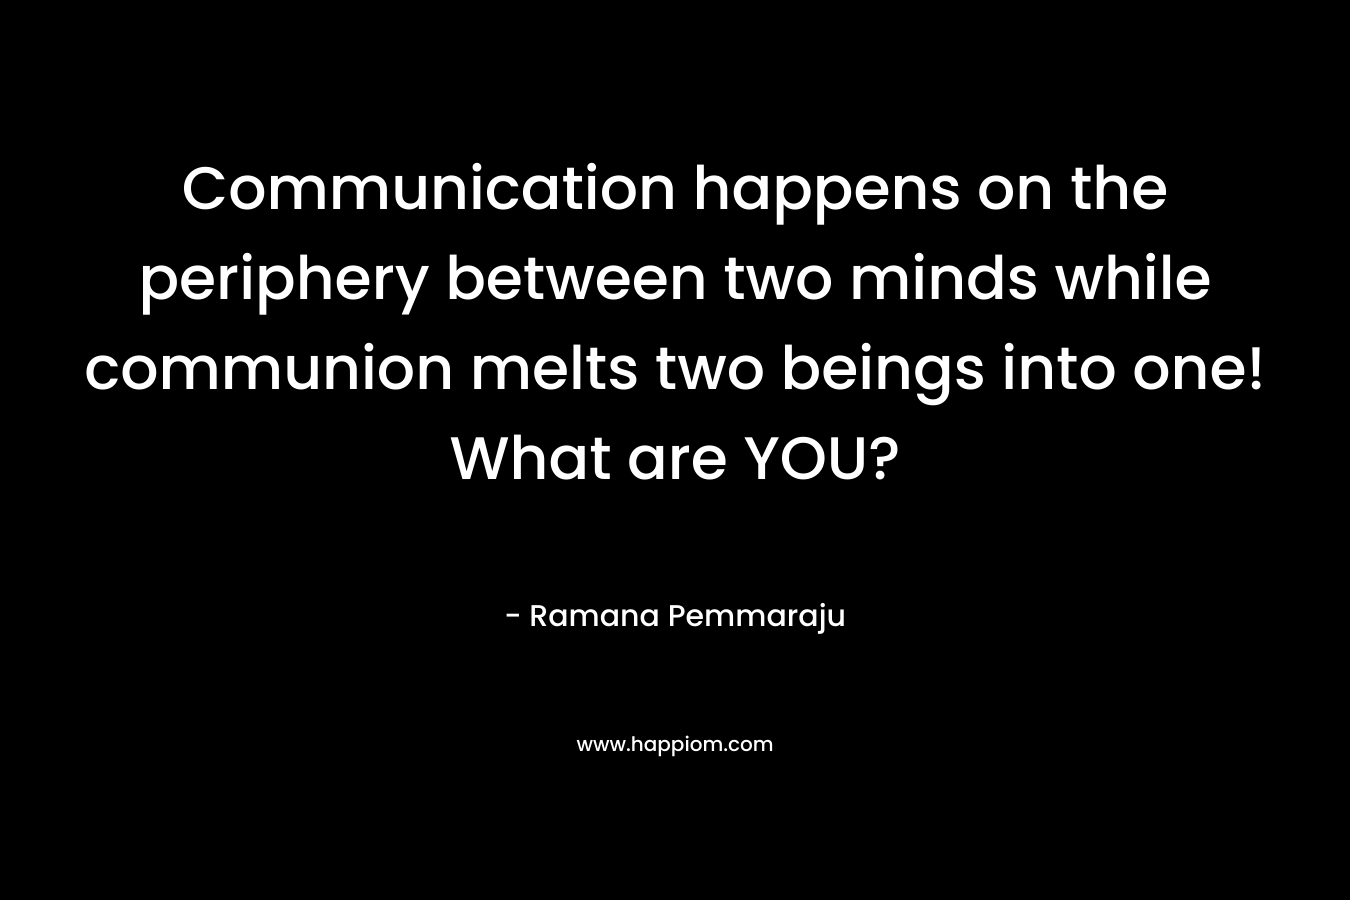 Communication happens on the periphery between two minds while communion melts two beings into one! What are YOU?